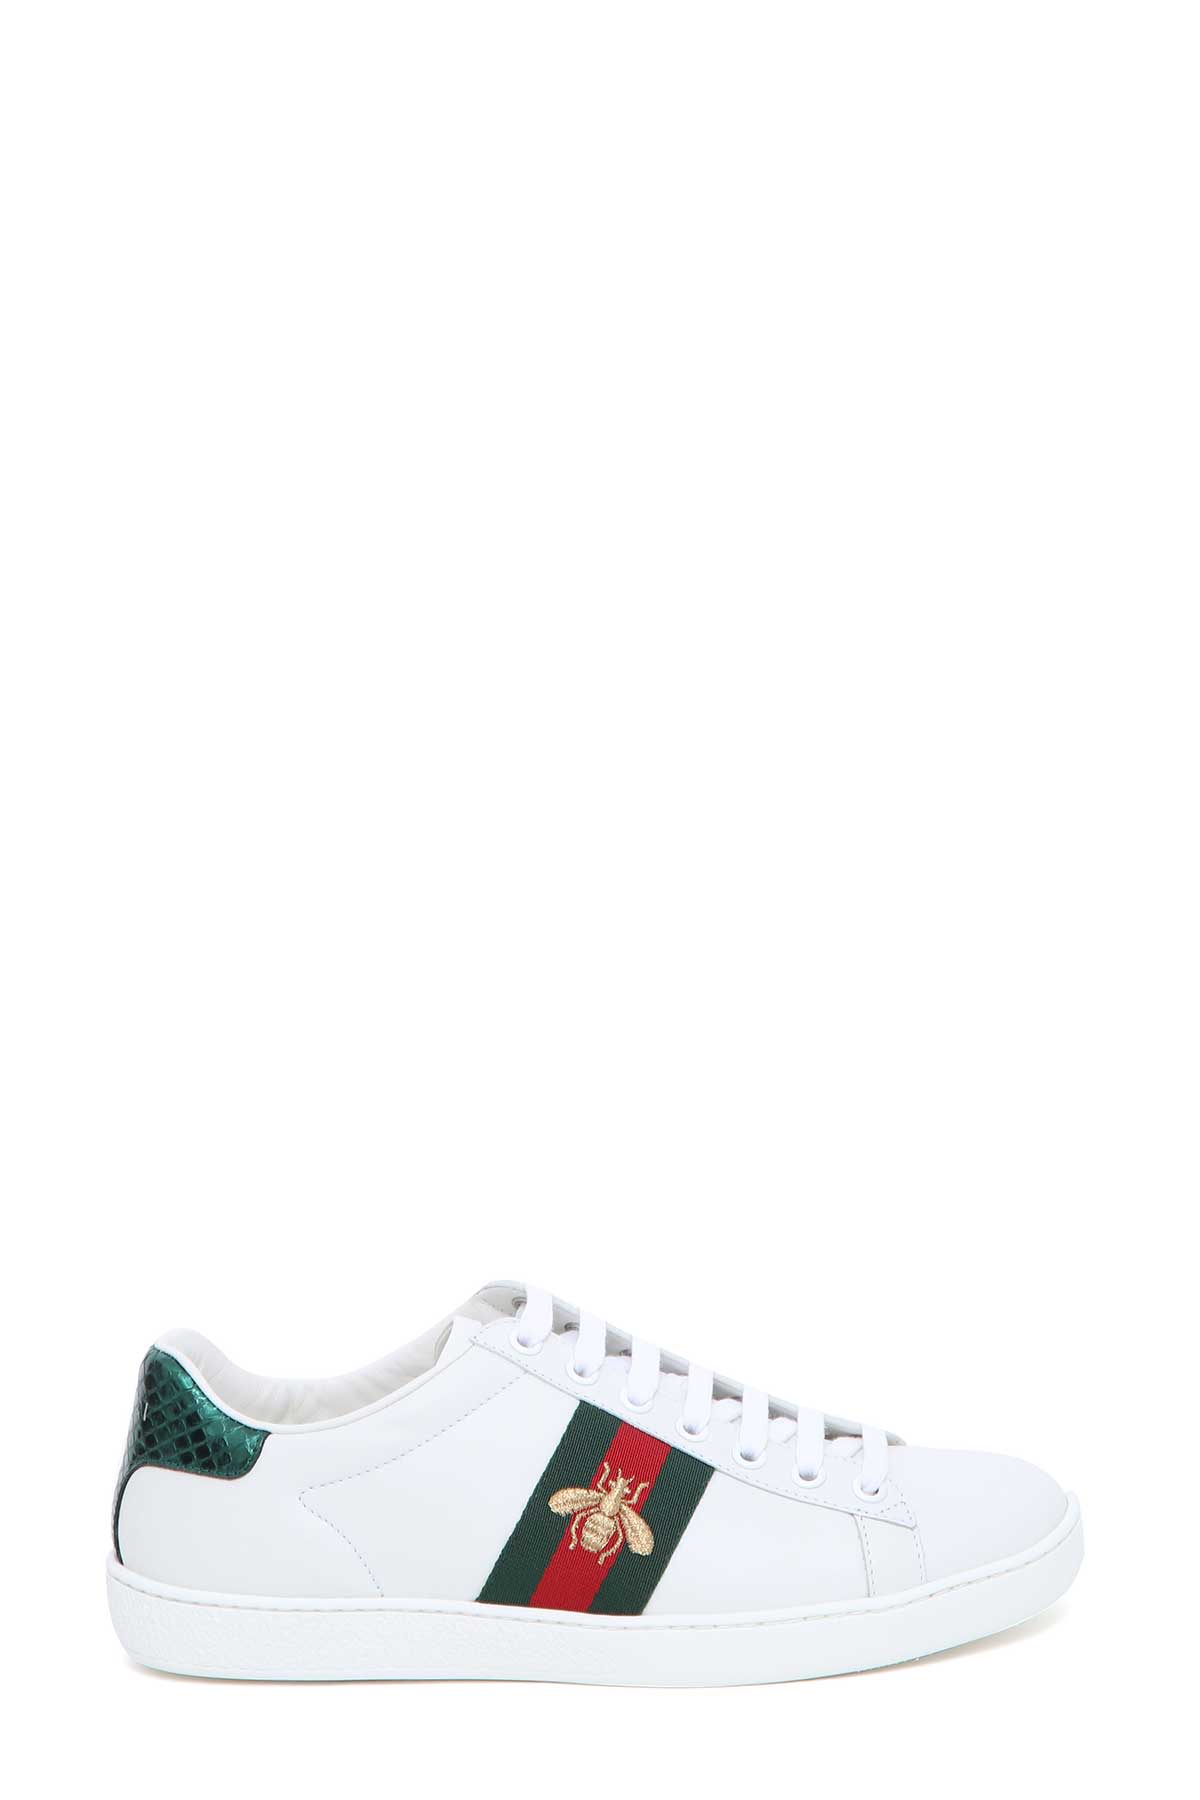 GUCCI Ace Watersnake-Trimmed Embroidered Leather Sneakers in White ...